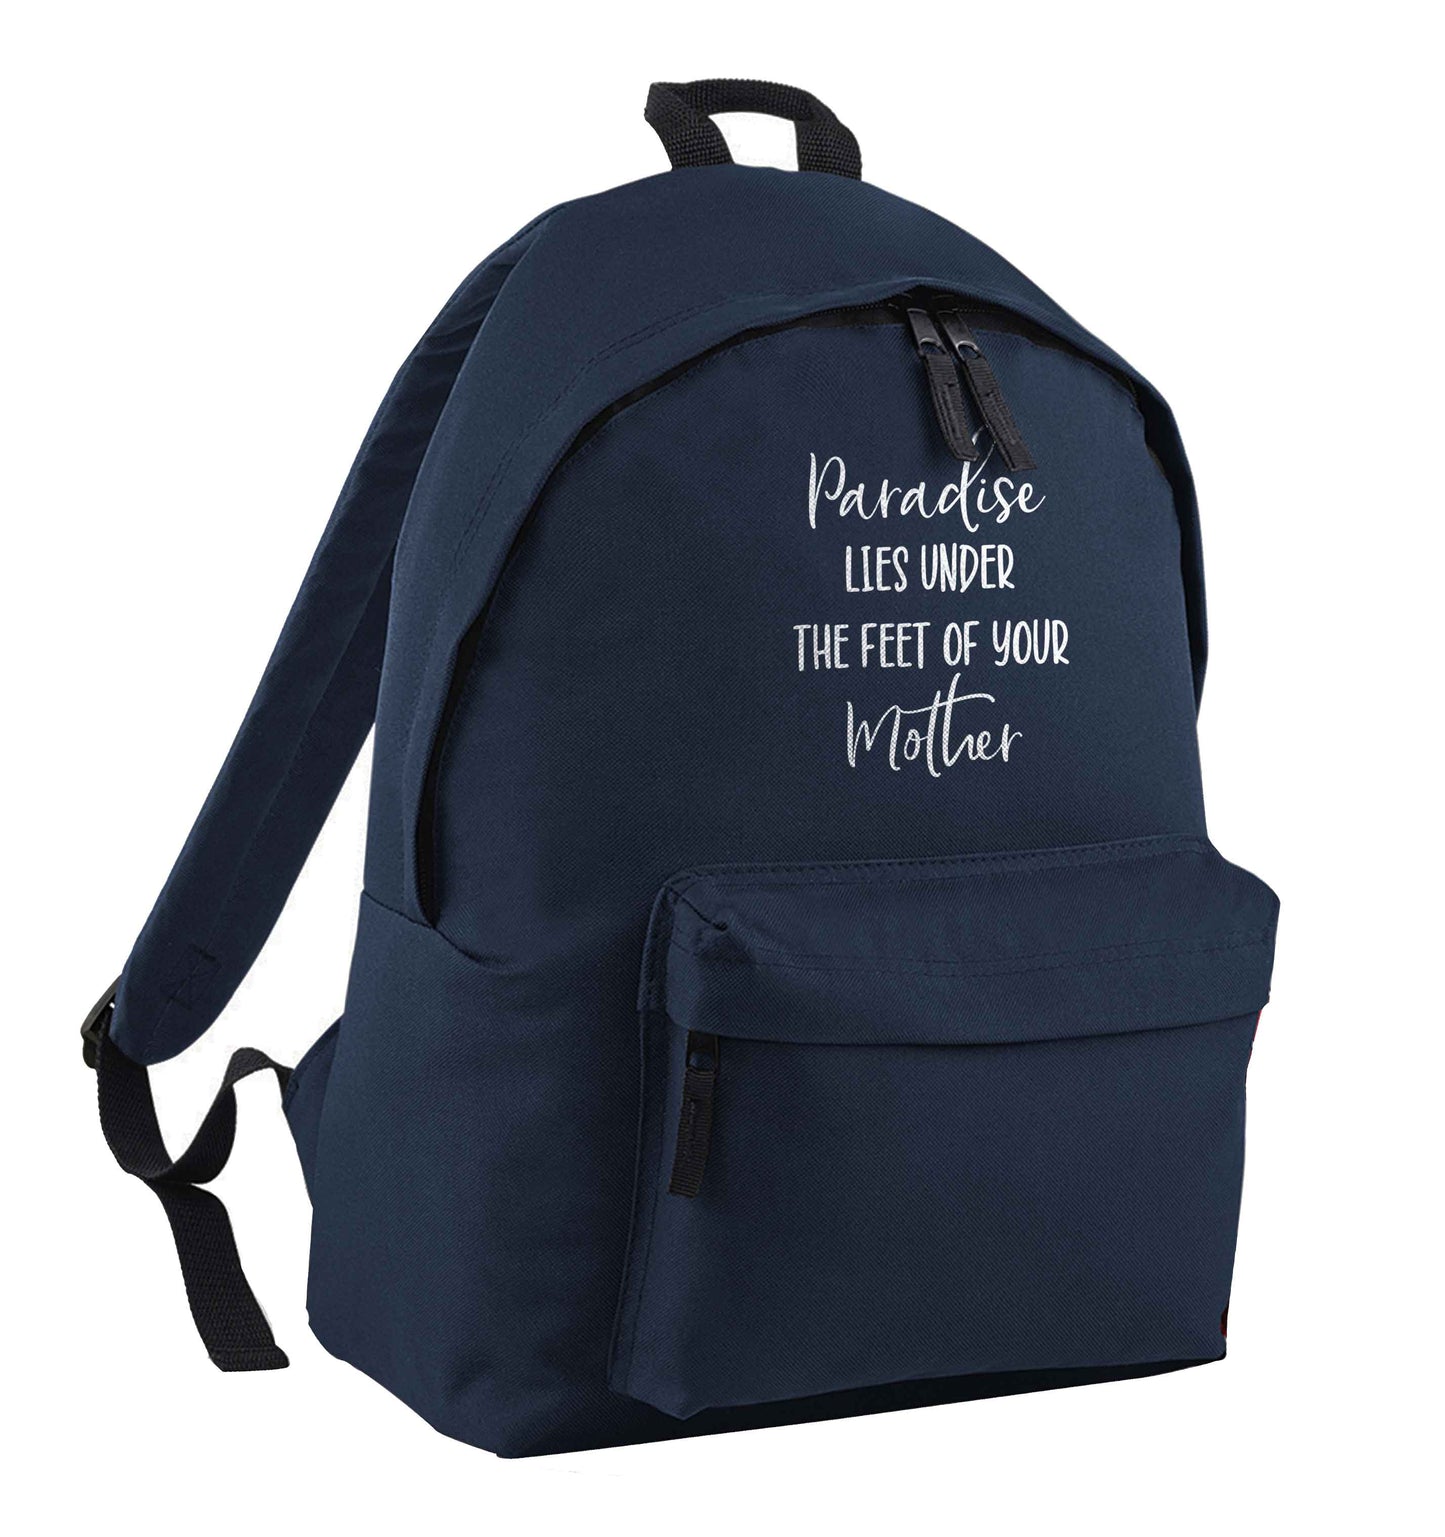 Paradise lies under the feet of your mother navy children's backpack